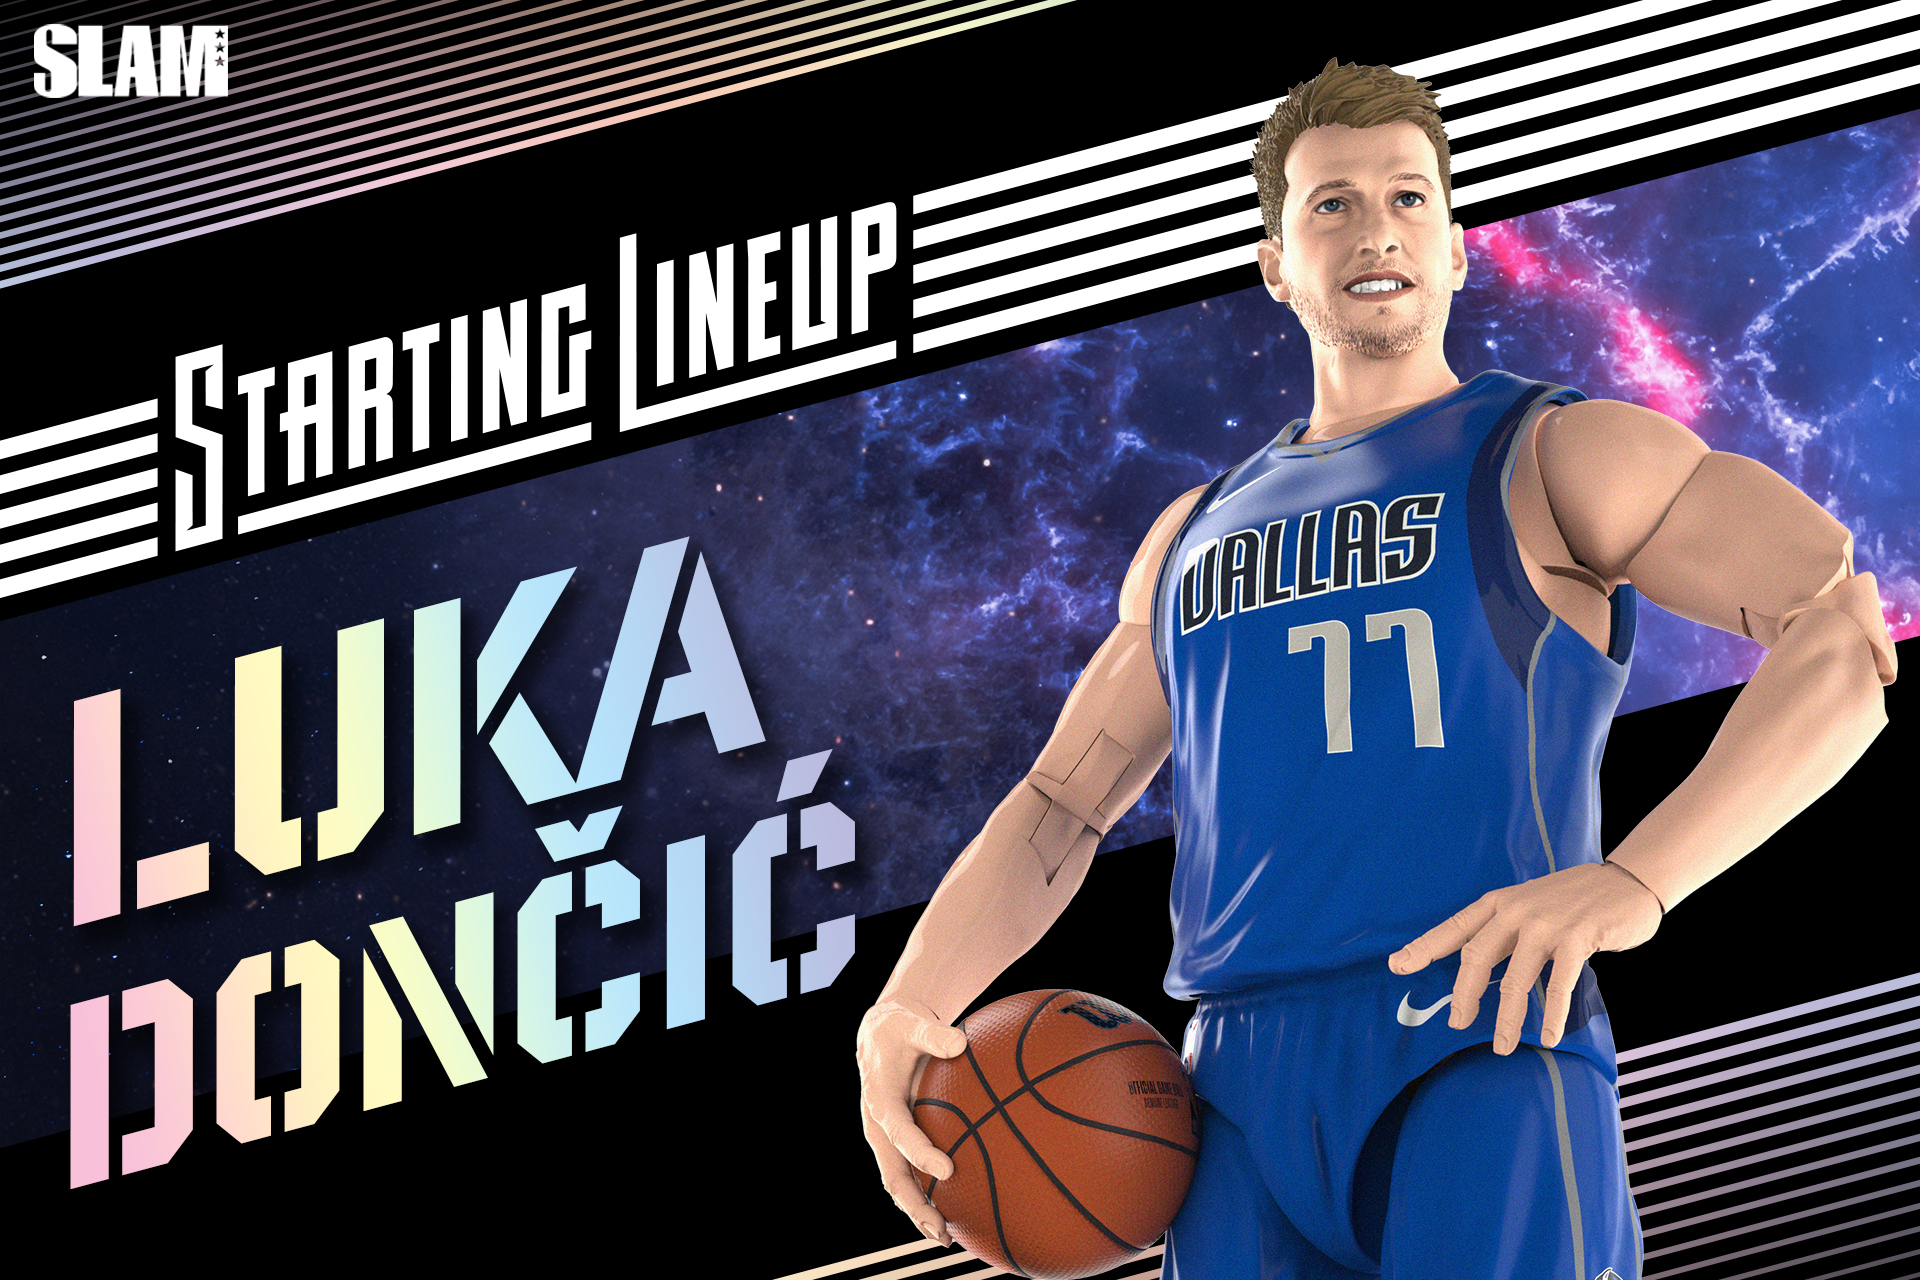 Starting Lineup’s Luka Doncic NBA Action Figure Showcases the Dominance of the Mavericks Superstar